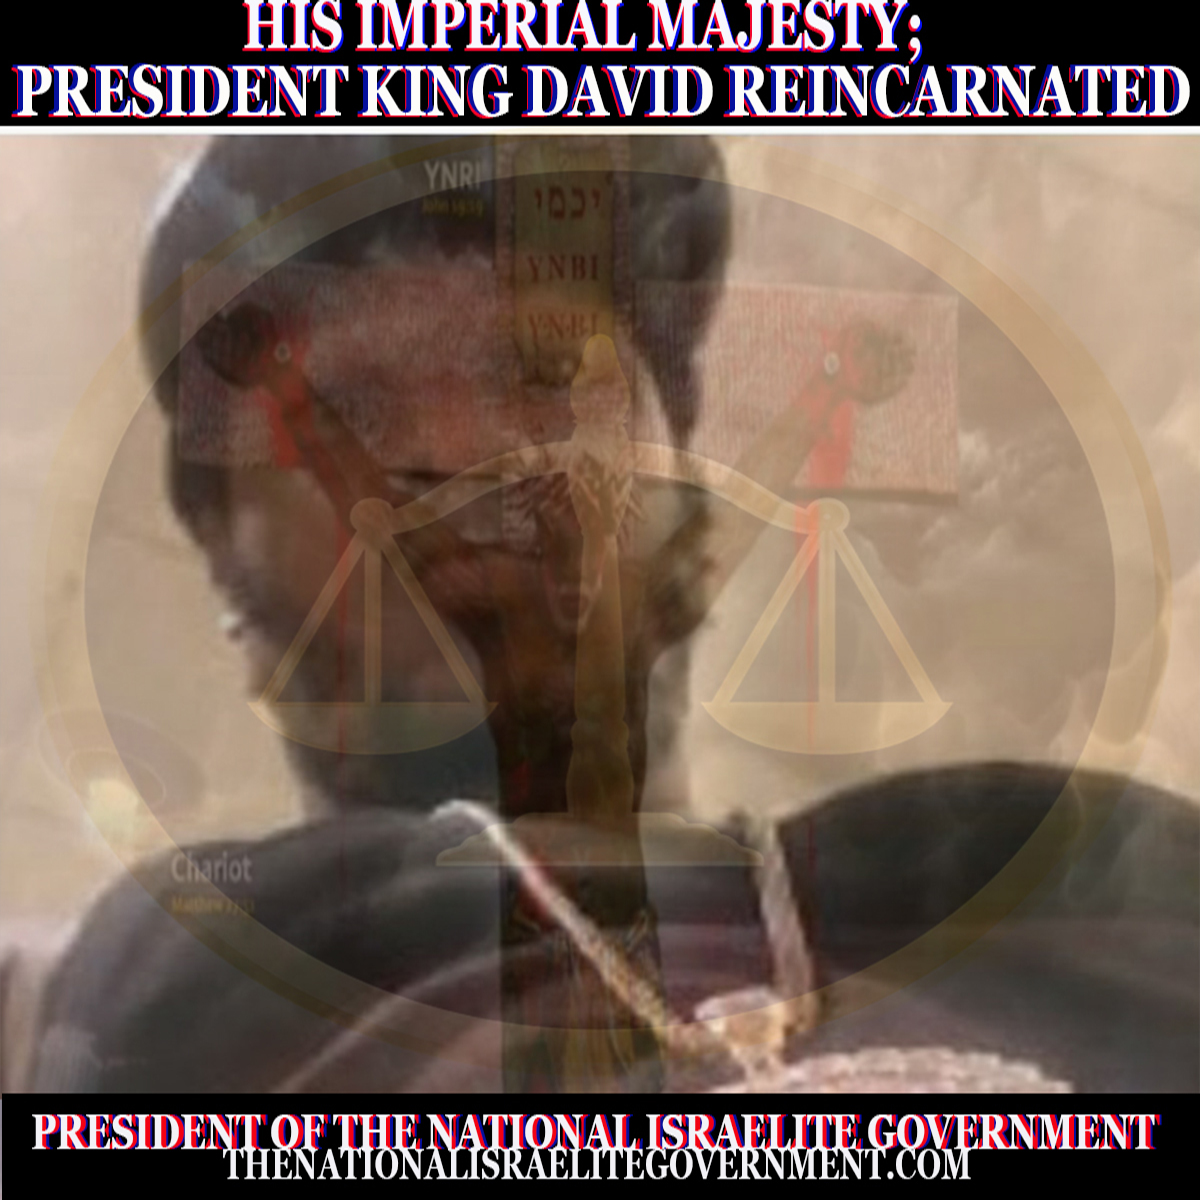 THE ISRAELITE GOVERNMENT HEAD OF STATE: PRESIDENT KING DAVID ll